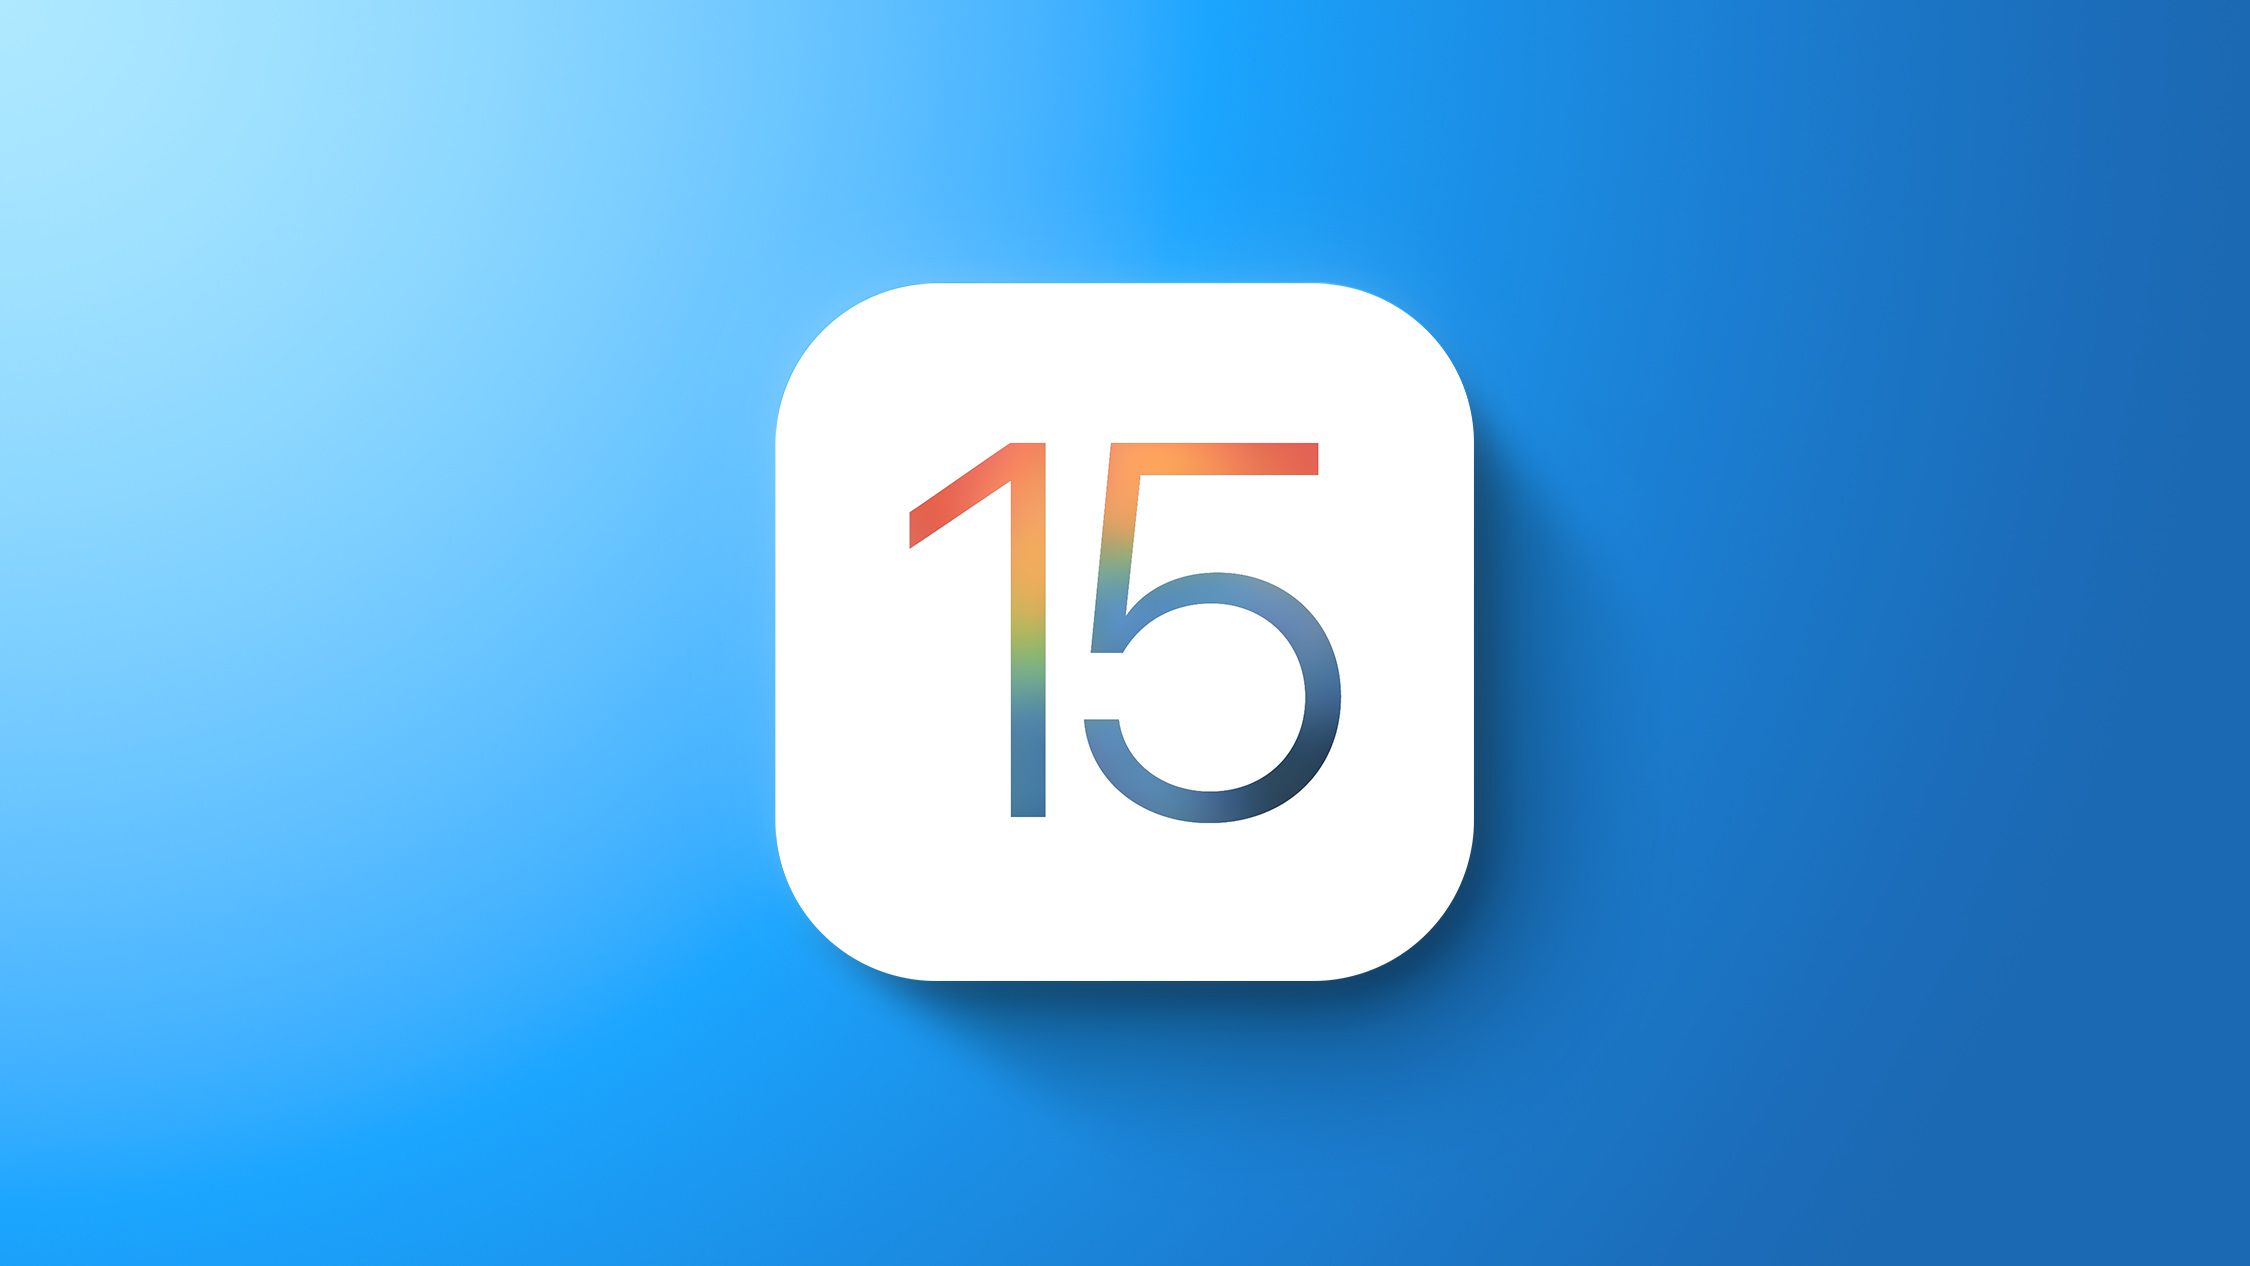 Apple Stops Signing iOS 15.0 Following iOS 15.0.1 Release, Downgrading No Longer..